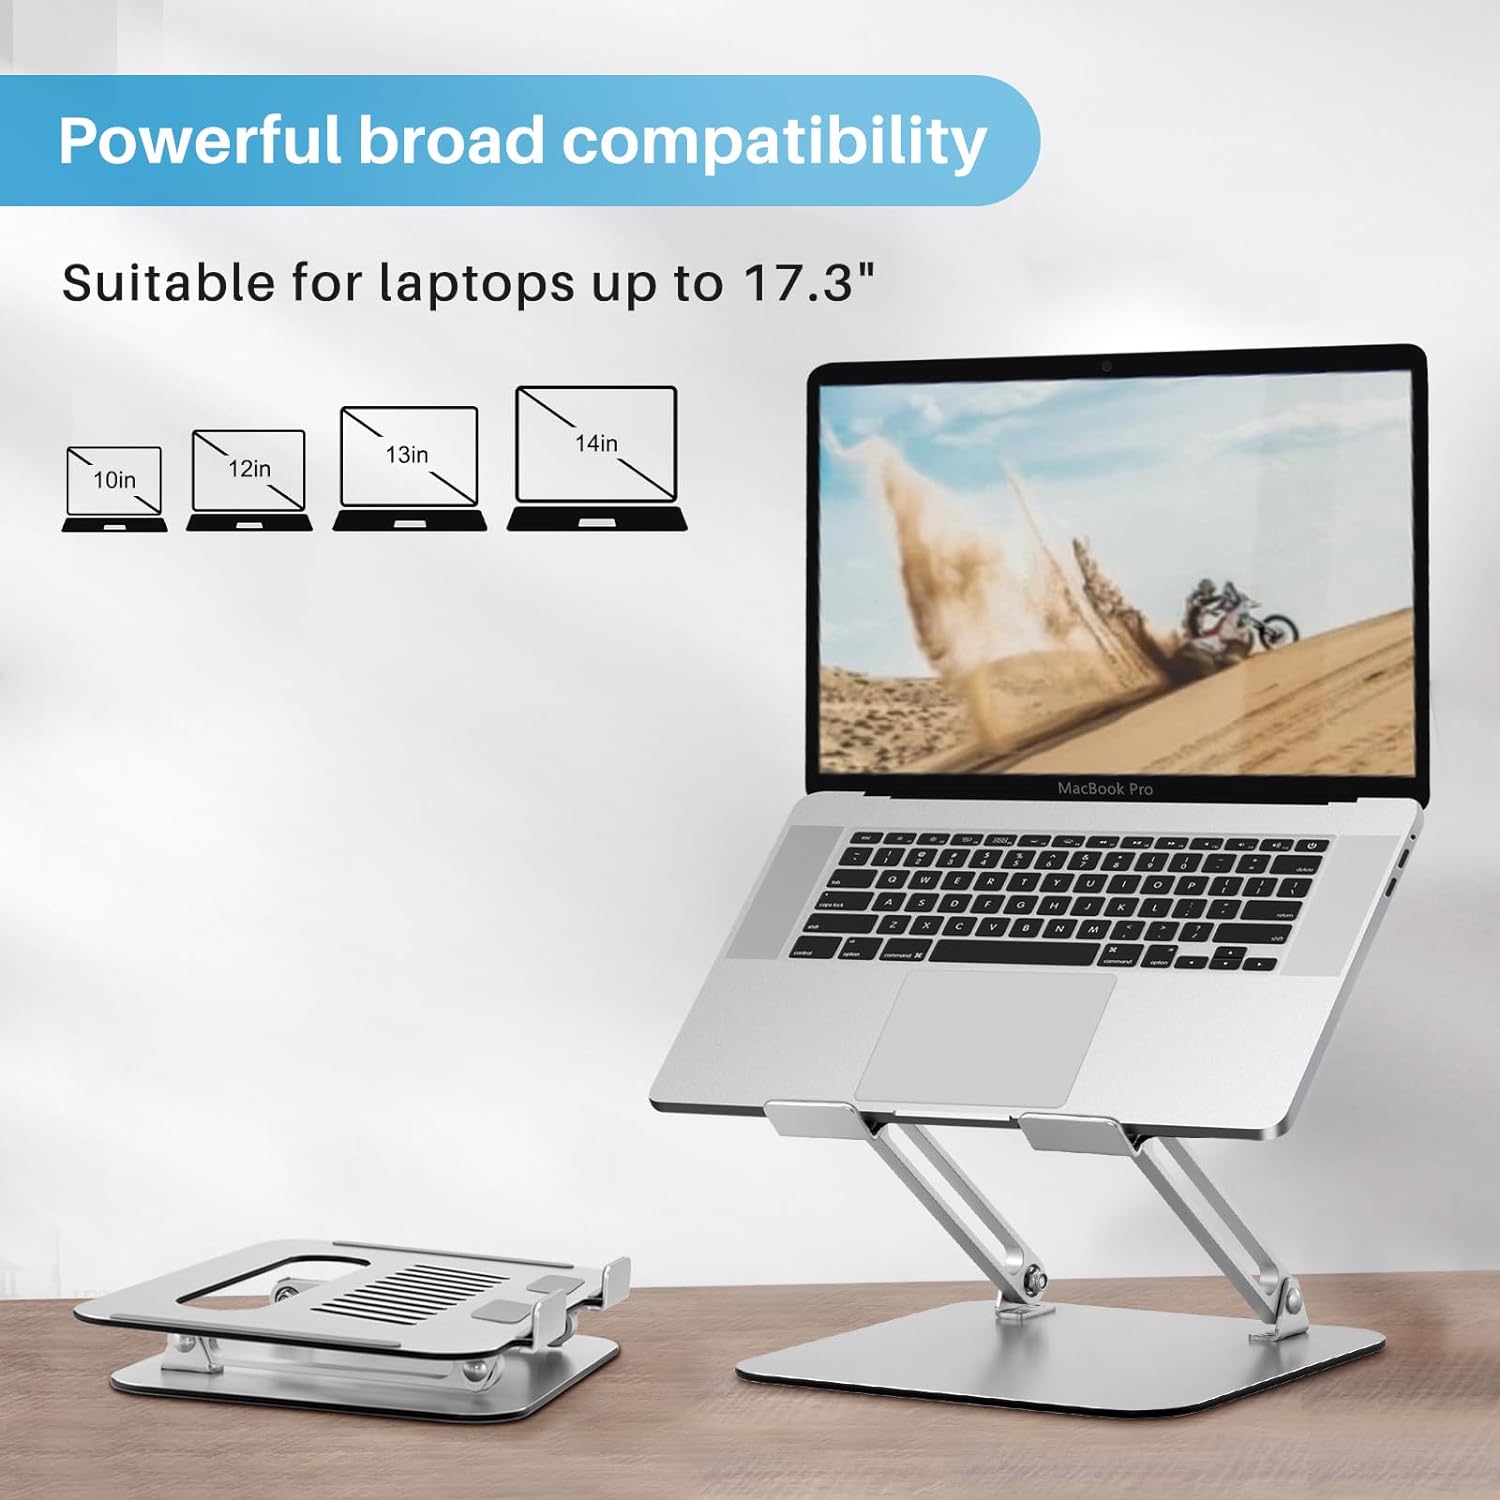 Fccabin Laptop Stand, Laptop Holder, Multi-Angle Stand with Heat-Vent, Adjustable Notebook Stand for Laptop